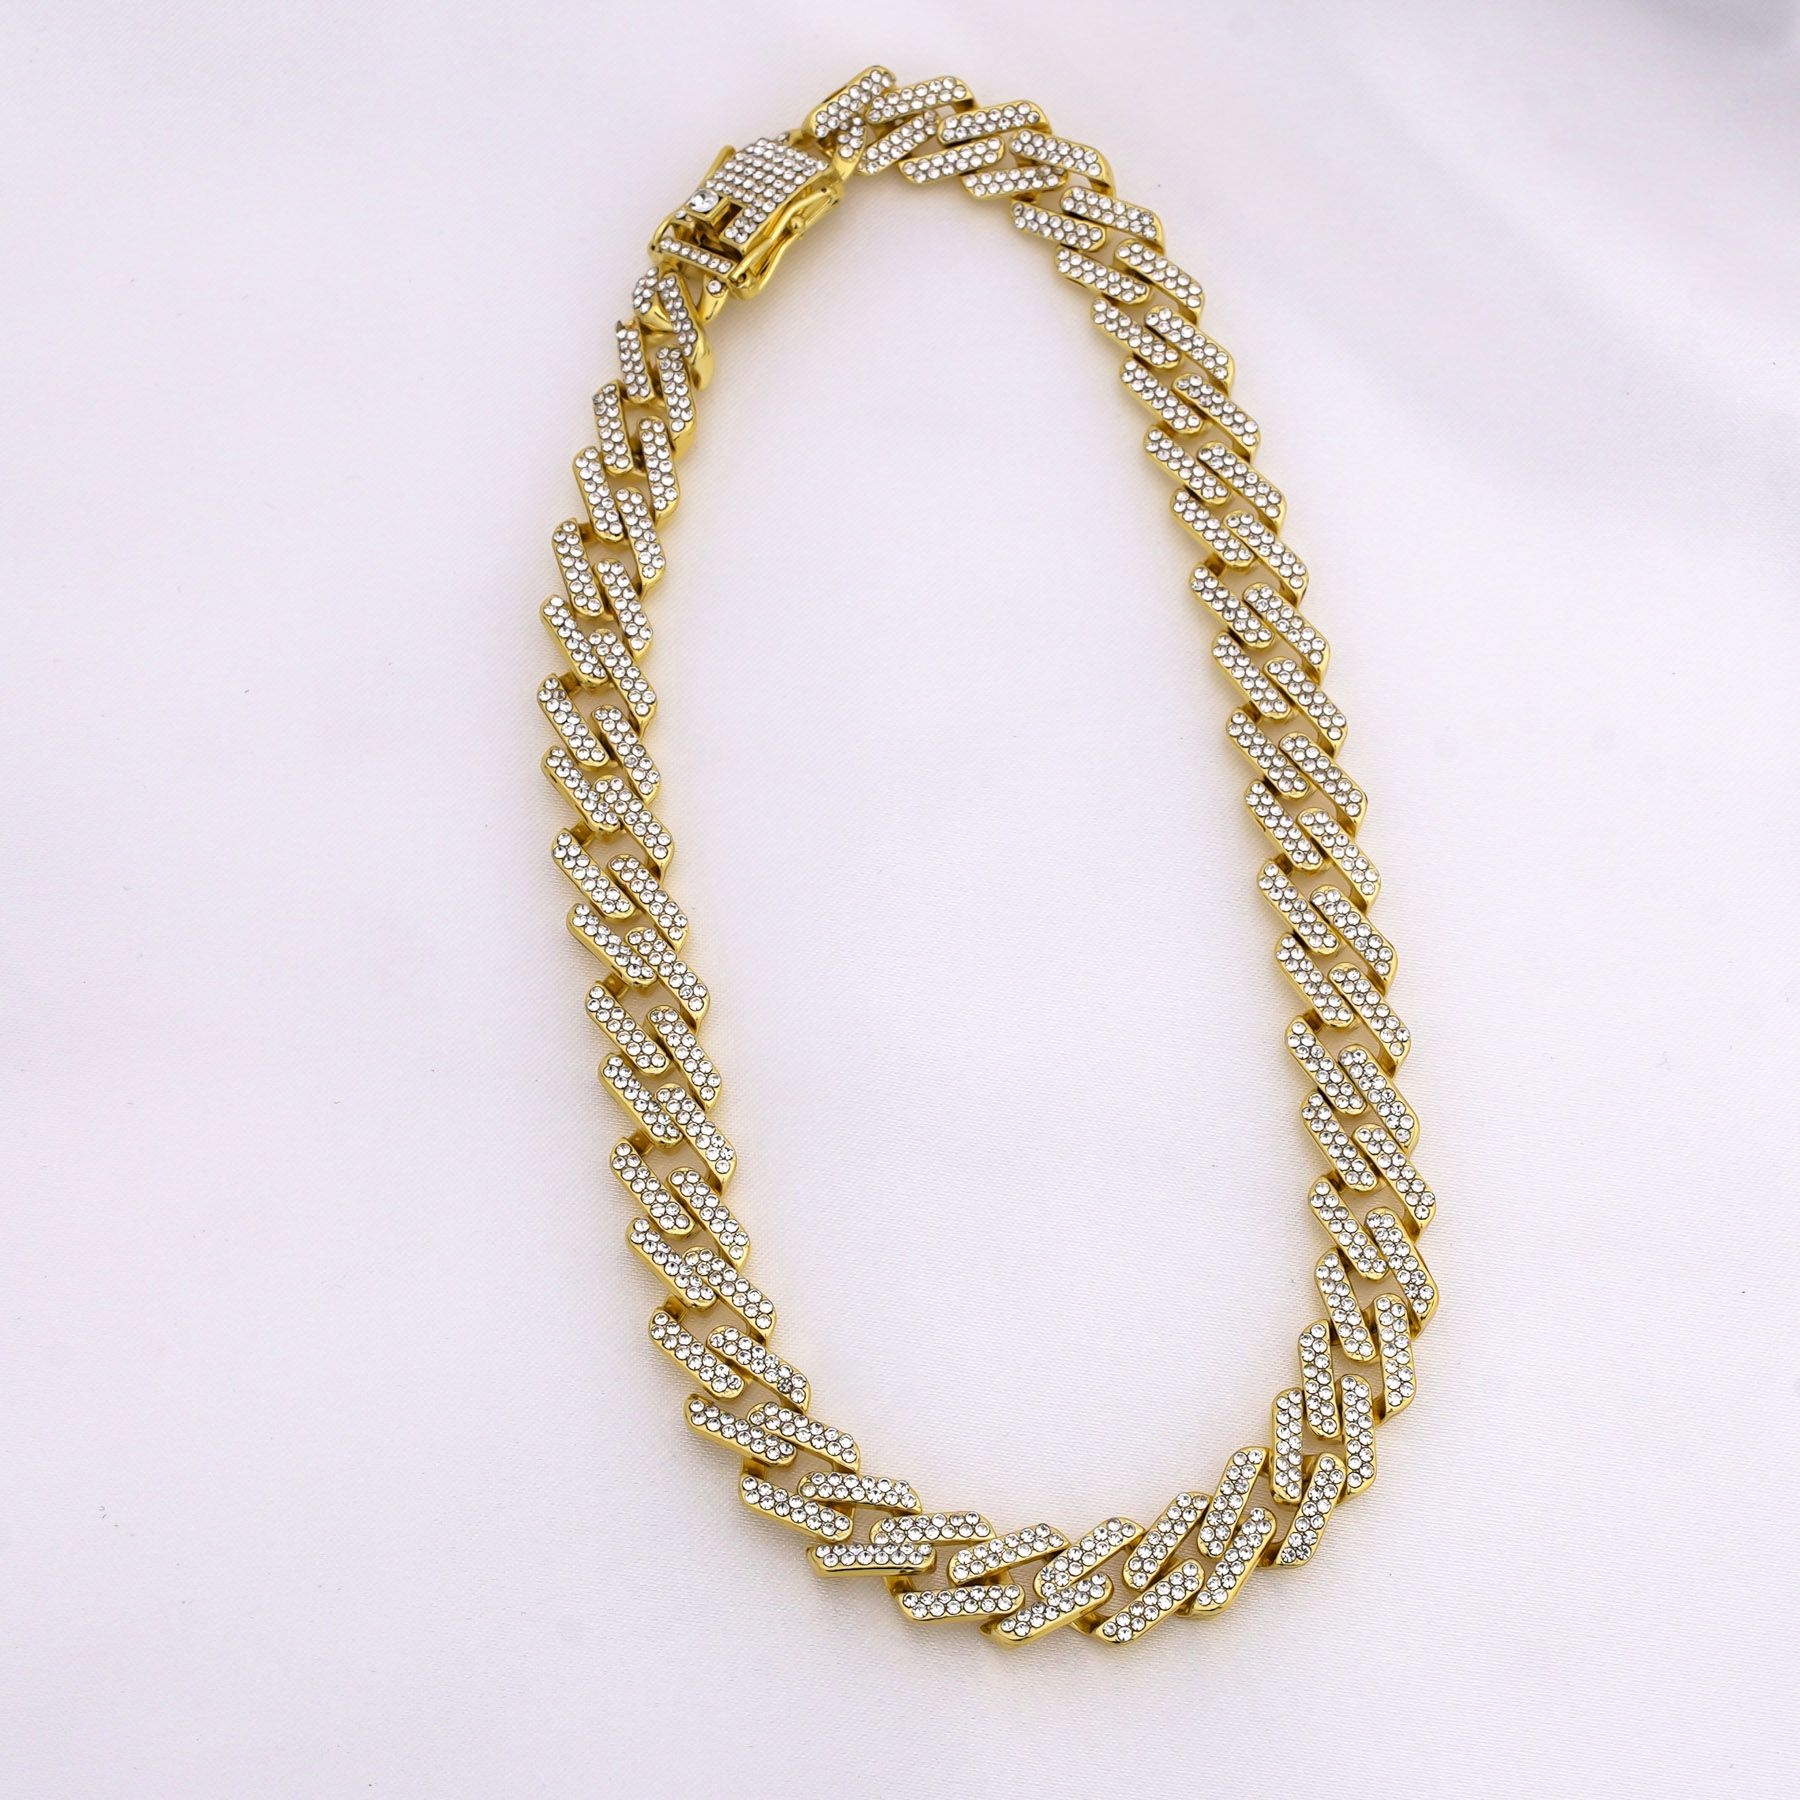 FAME CHAIN NECKLACE - GOLD ' - ' ΑΛΥΣΙΔΕΣ